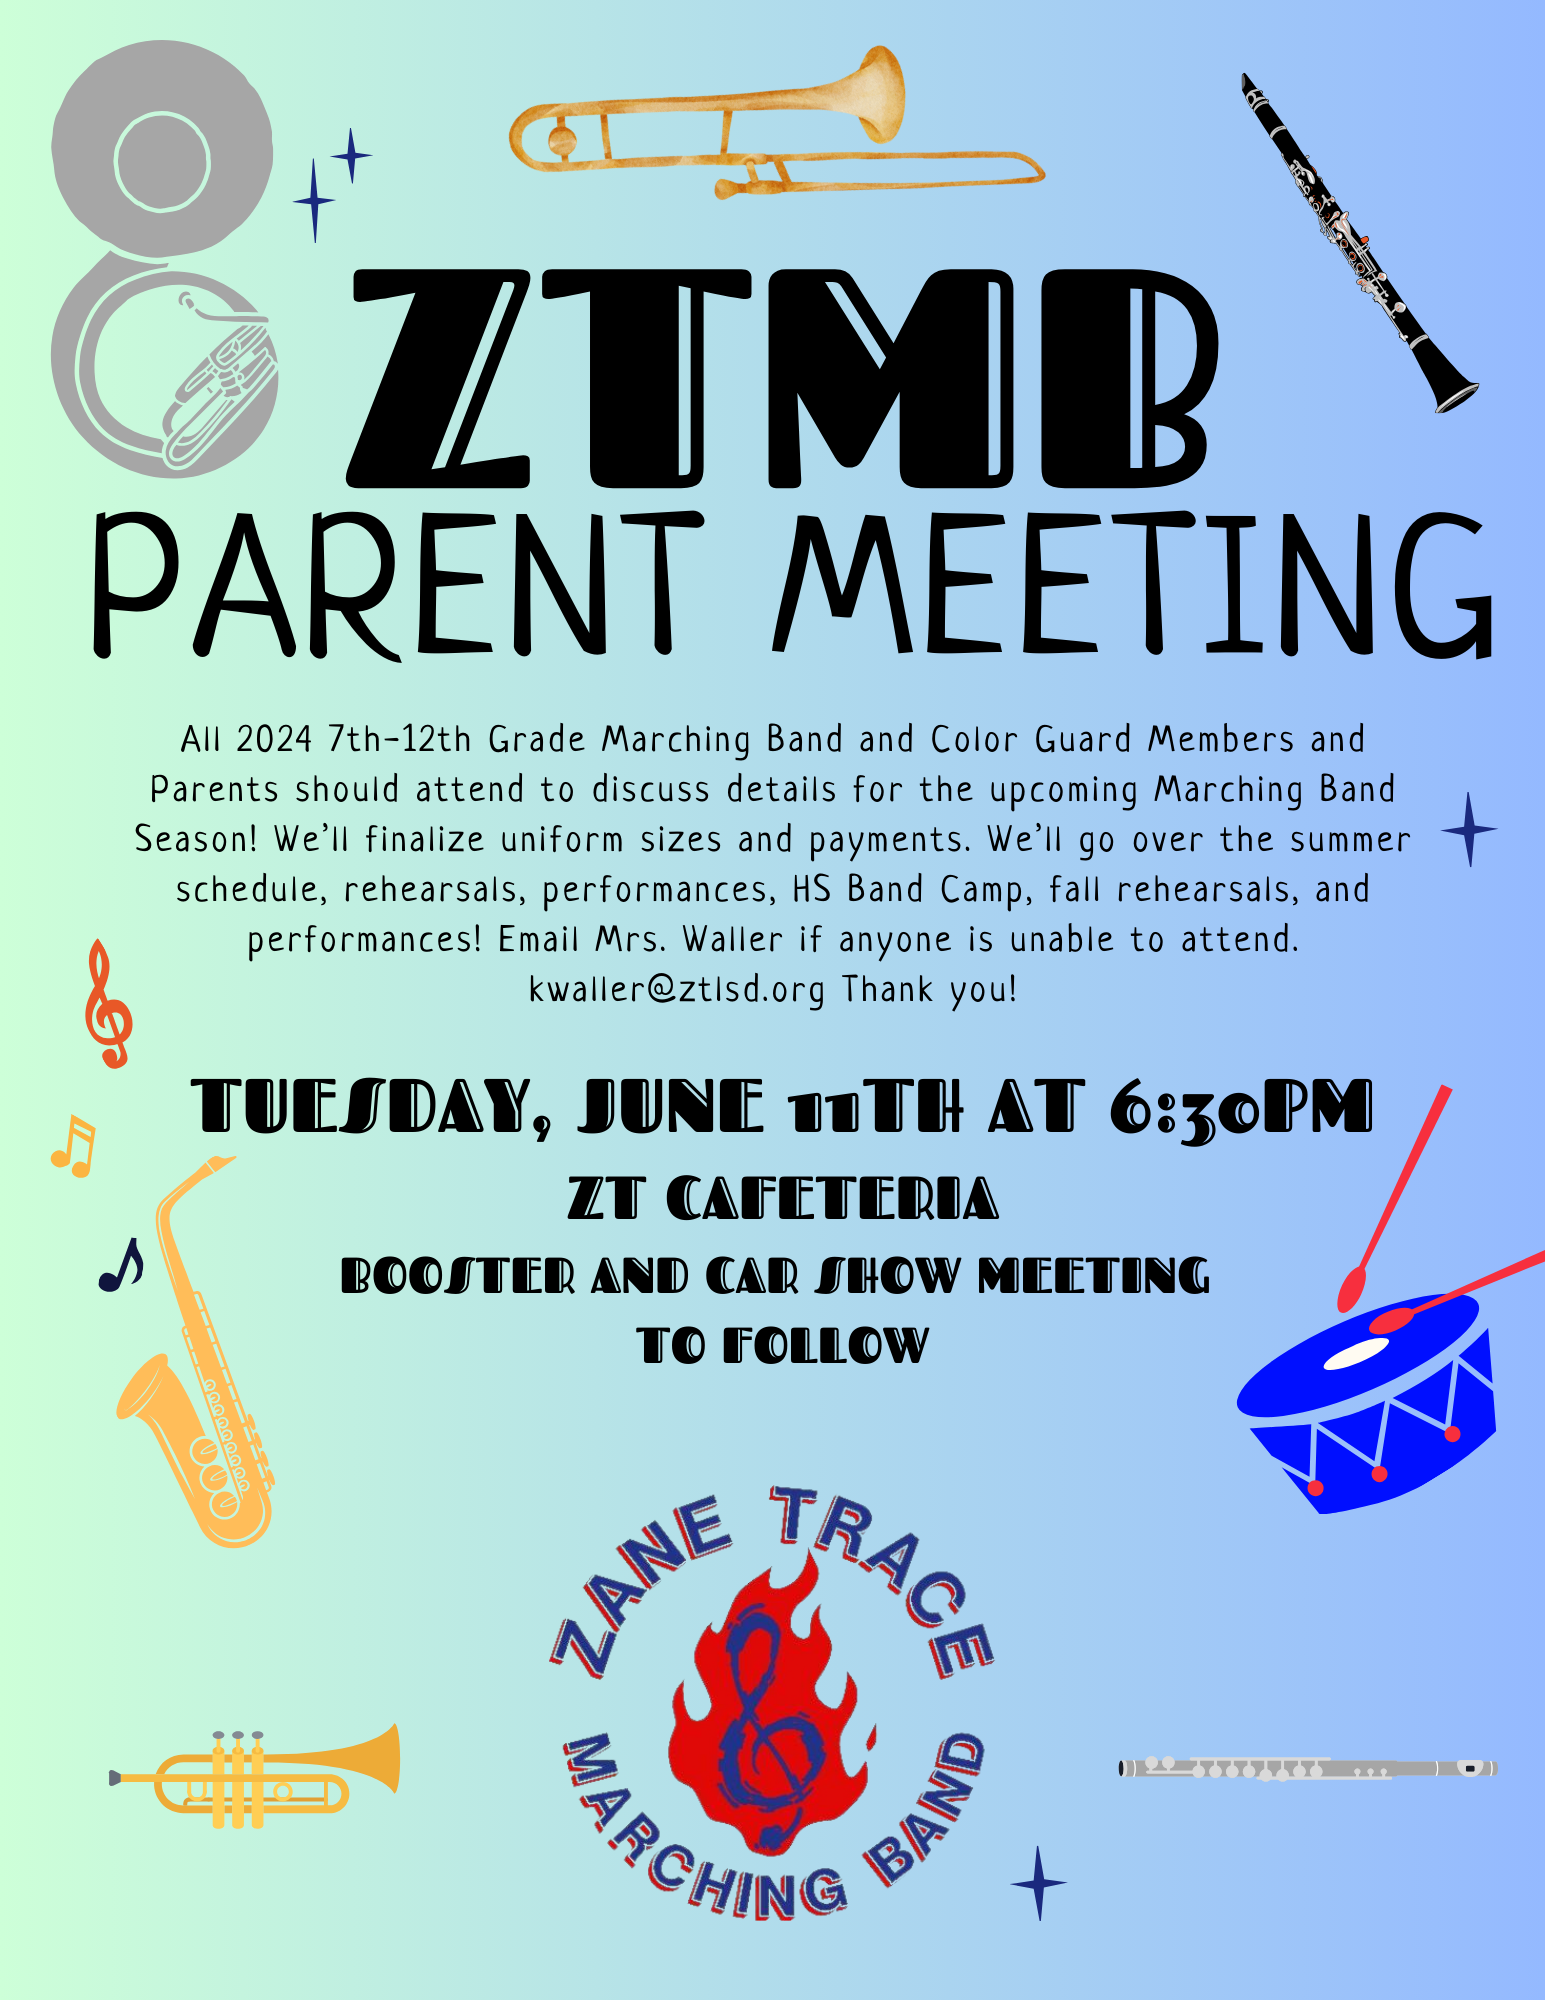 7th-12th Grade Marching Band Parent Meeting 2024